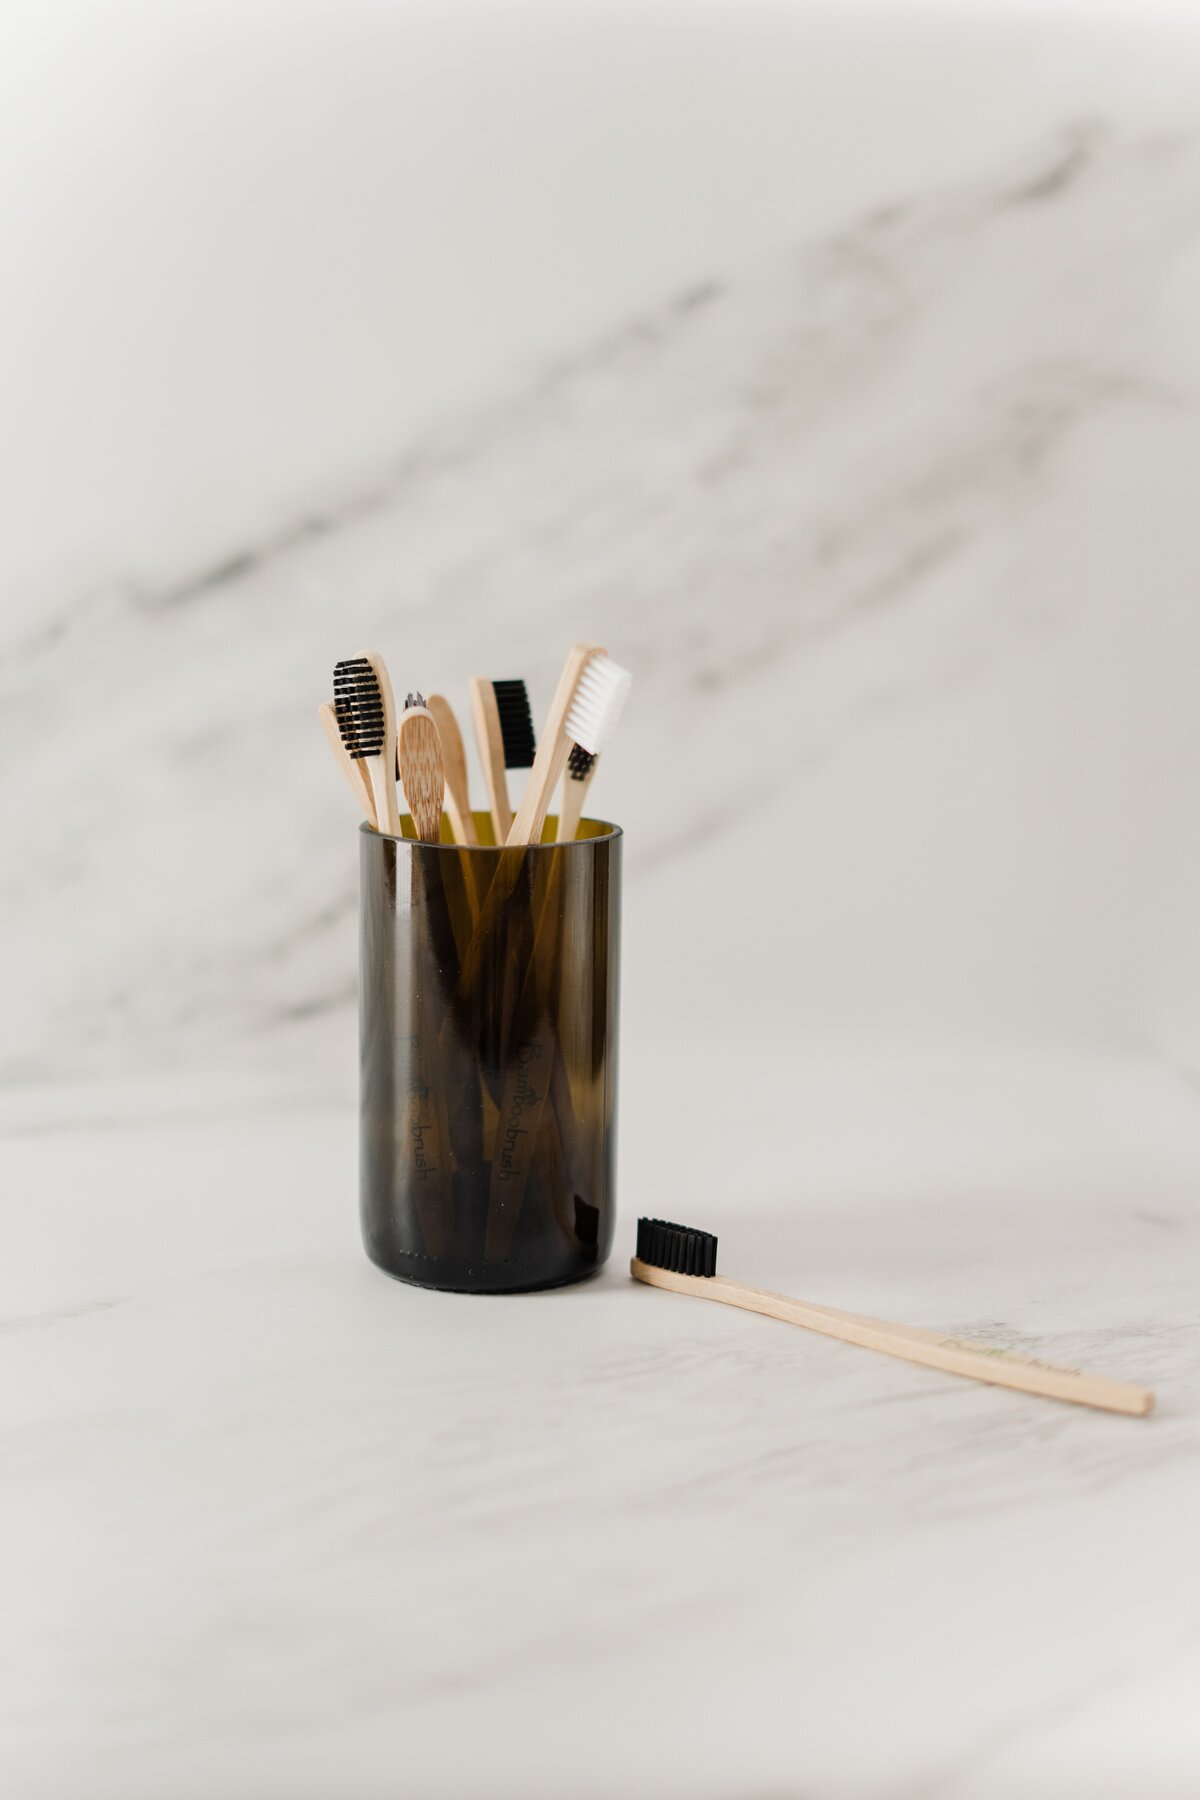 wooden-toothbrush-in-a-cup-3737585